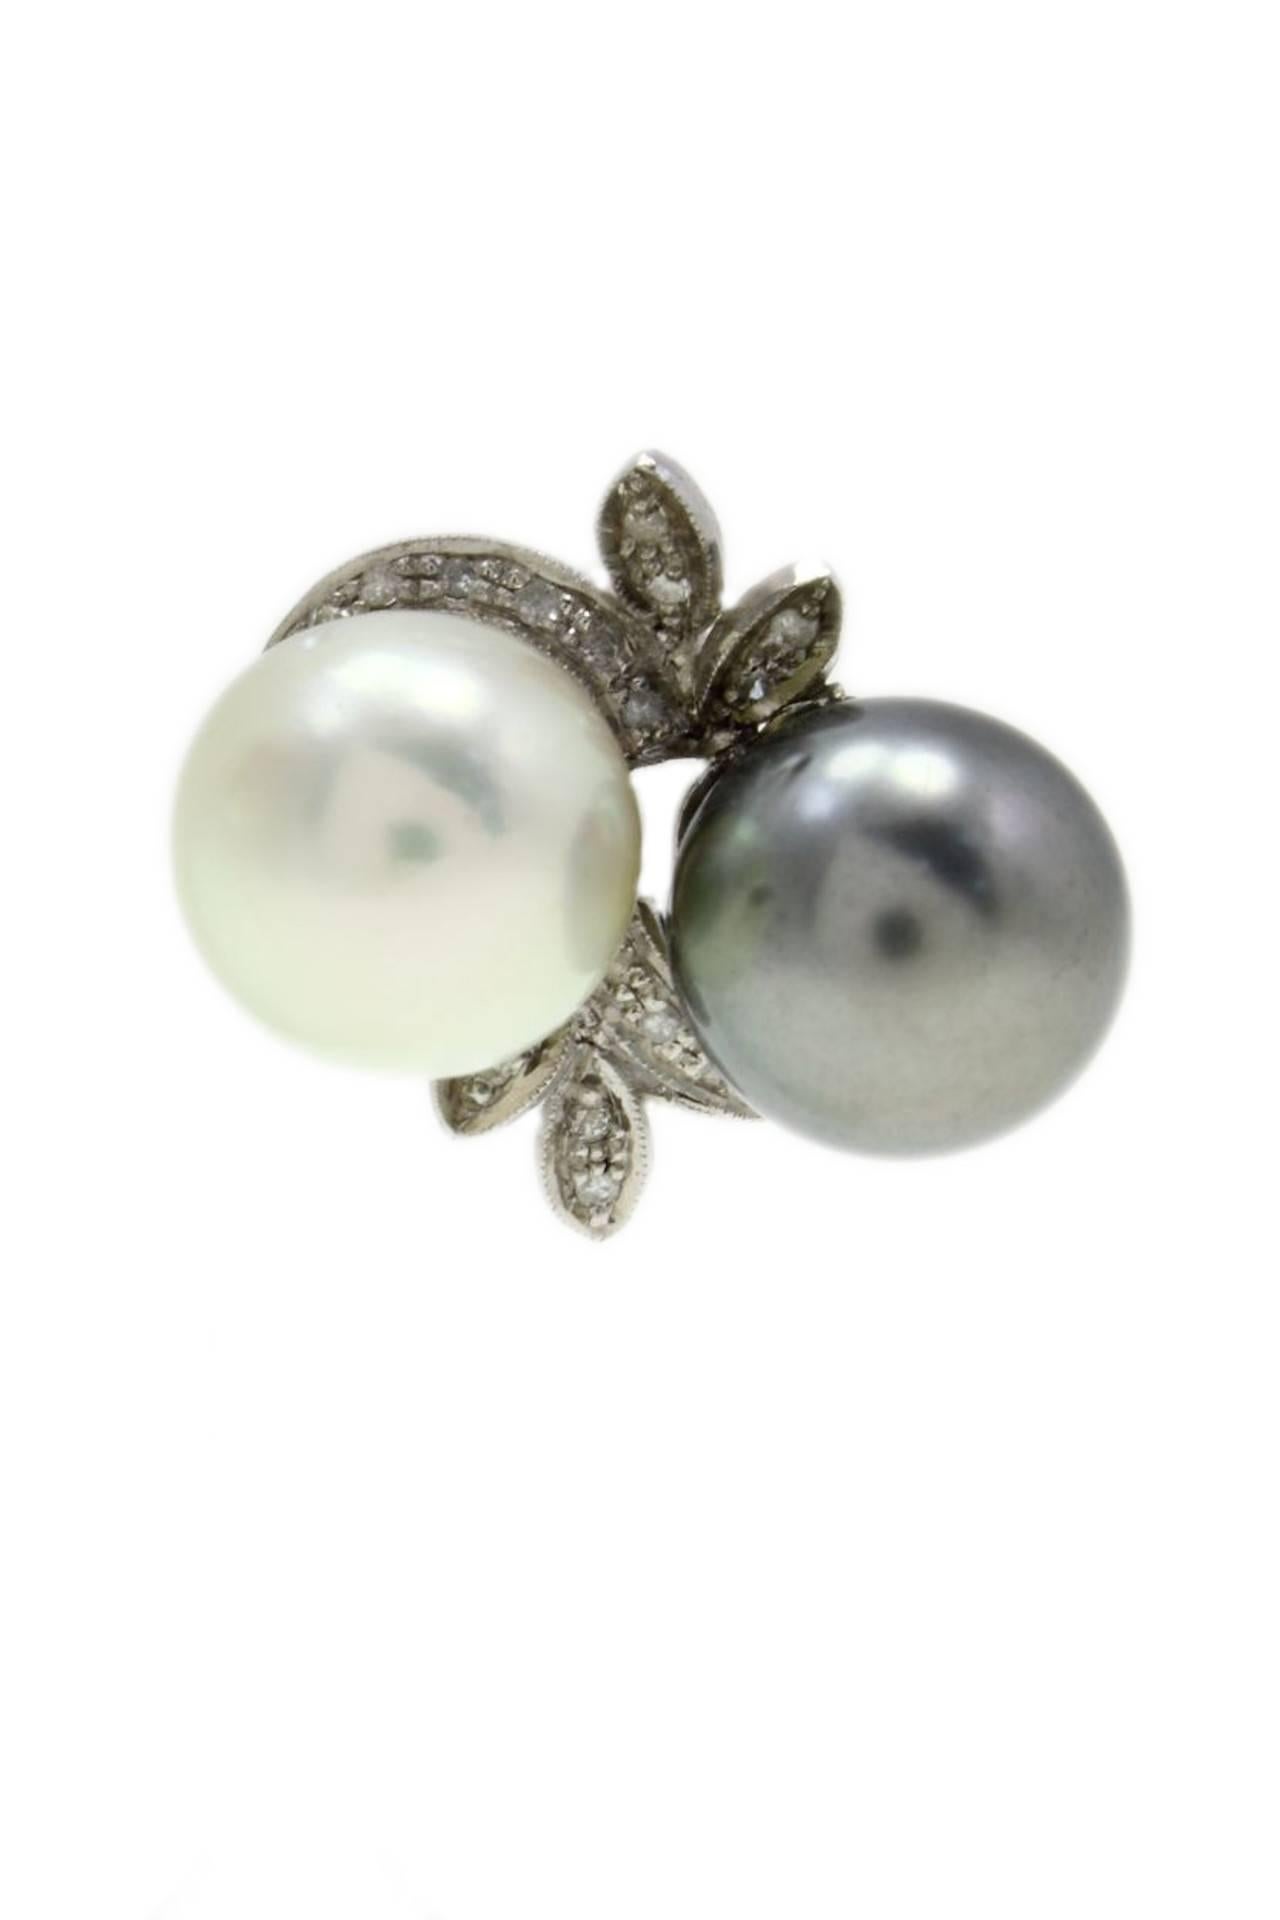 Stud earrings in 14kt white gold composed of 2 different color pearls (white and gray) surrounded by leaves covered in diamonds.

diamonds 0.55kt
pearls 10.90gr
tot weight 18.2gr
r.f. ufoi